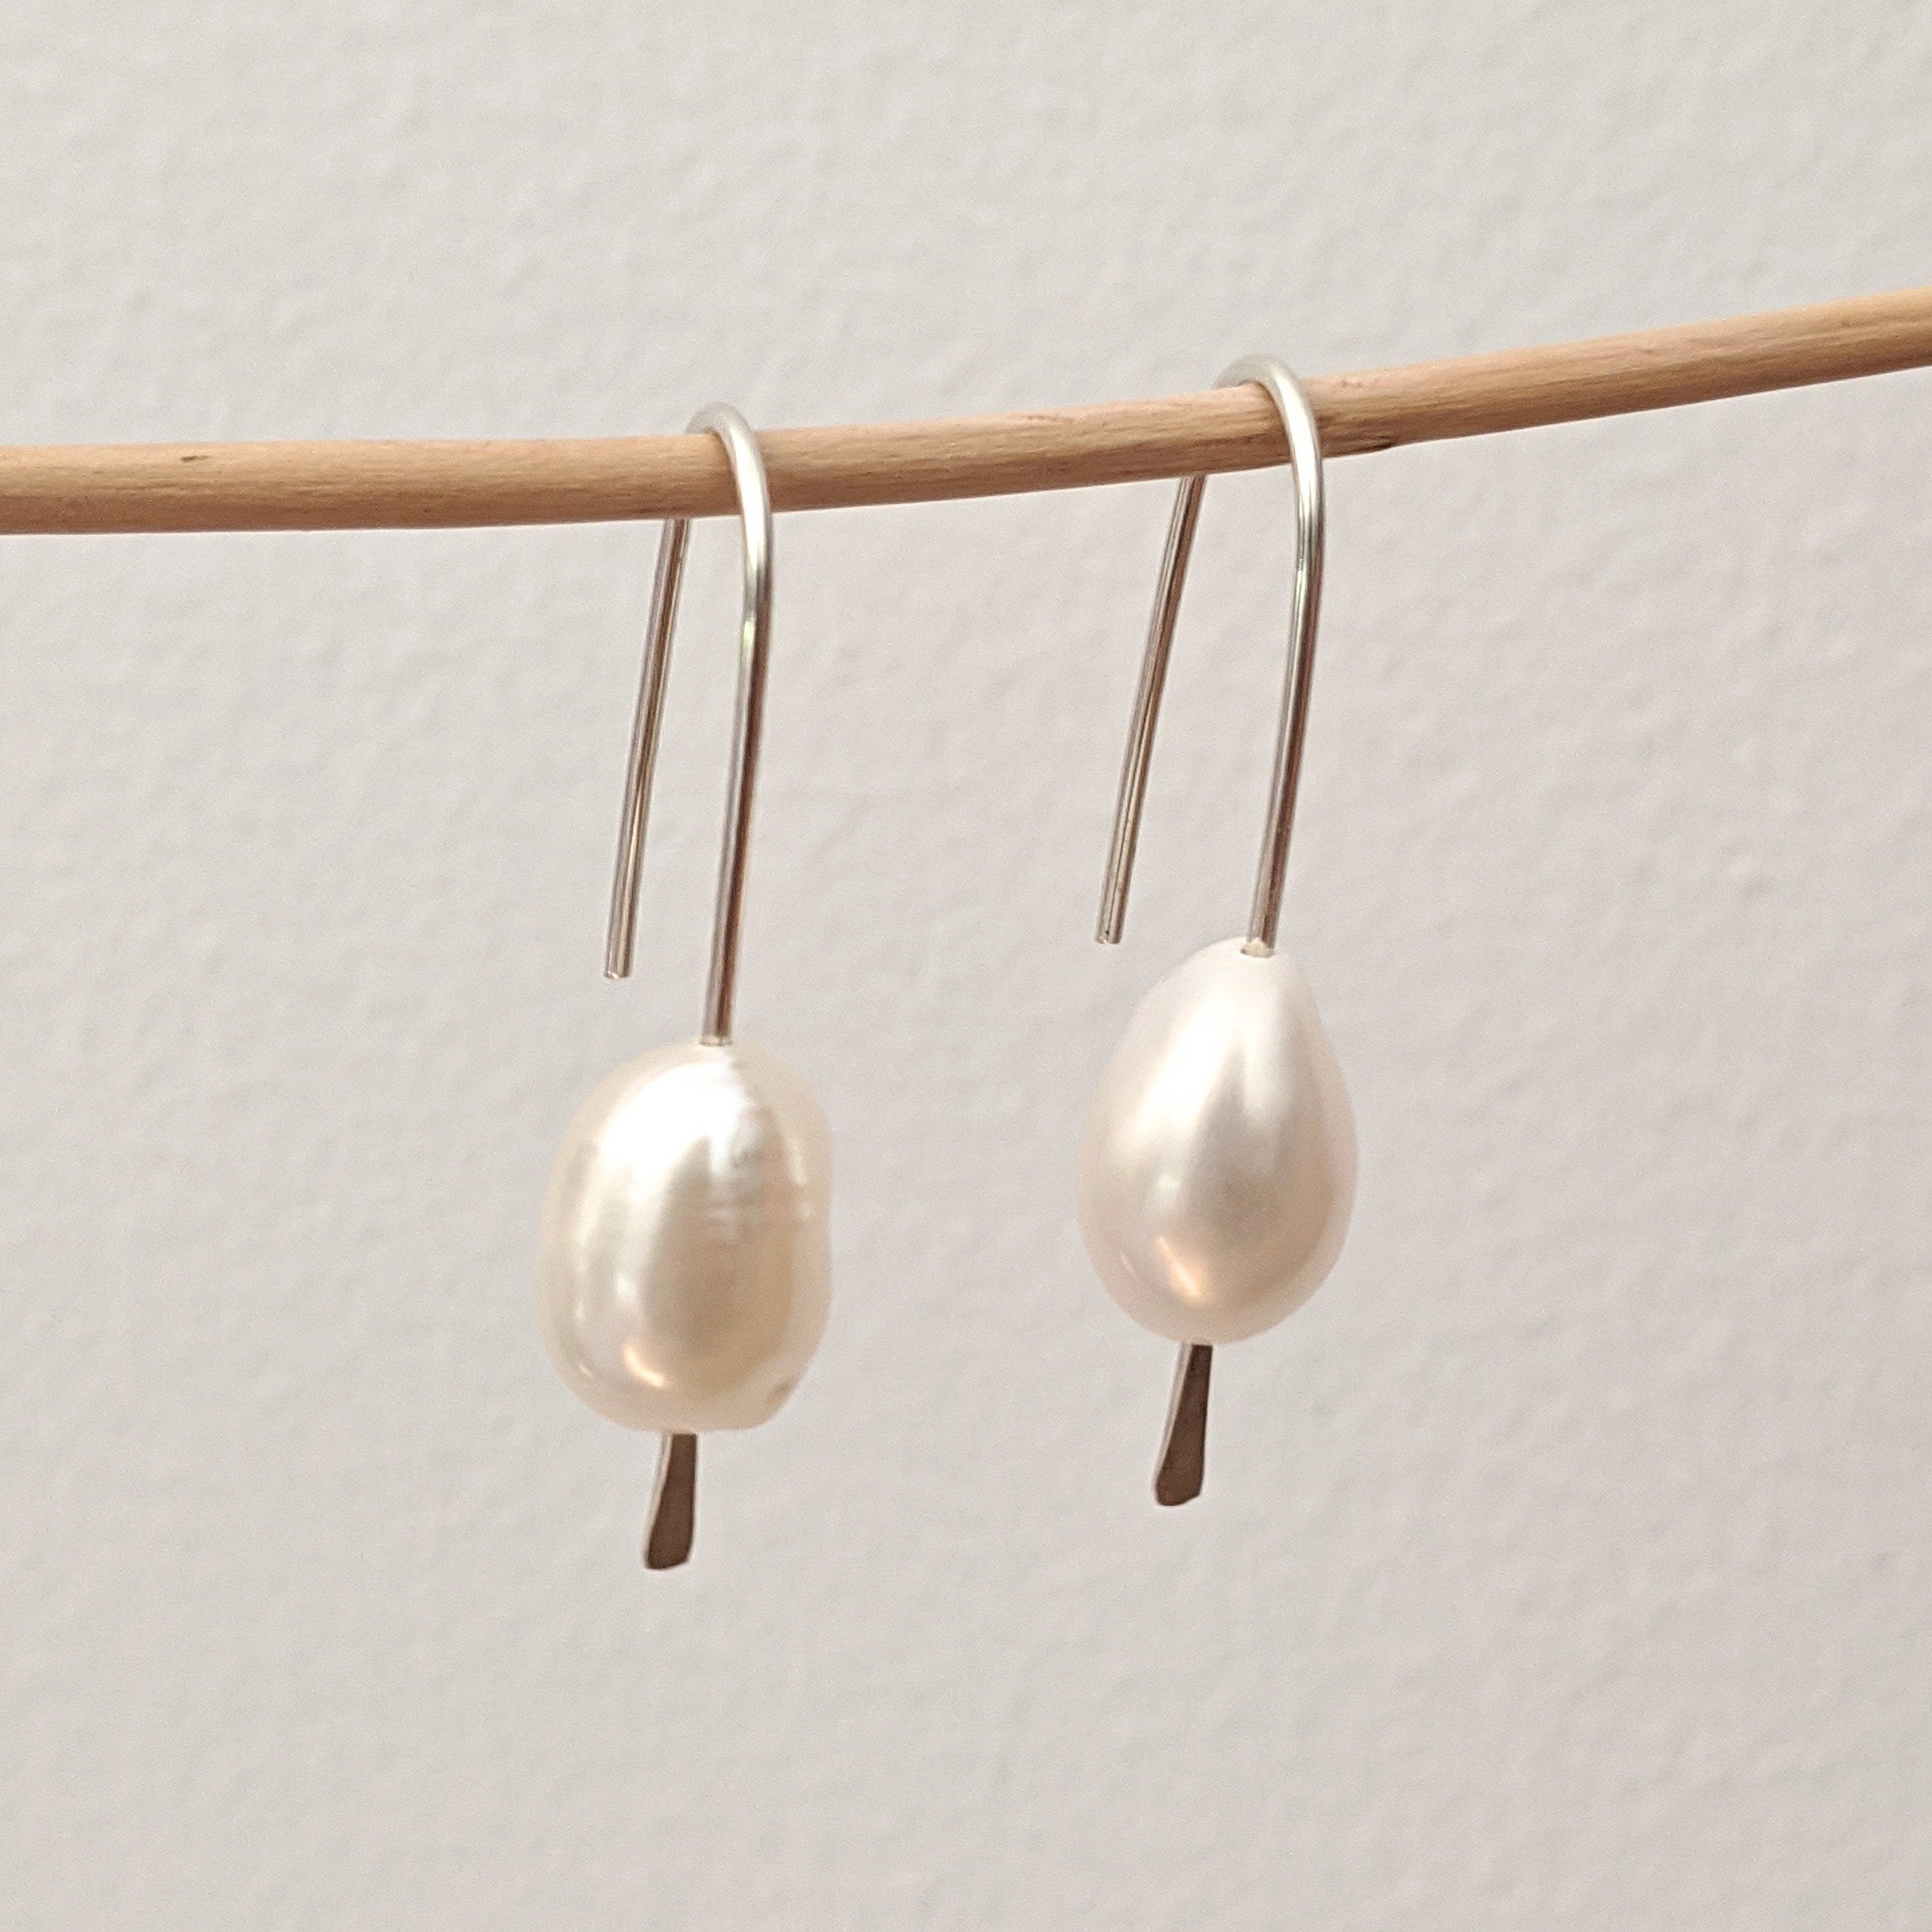 Mimi small sterling silver drop earrings with white pearl